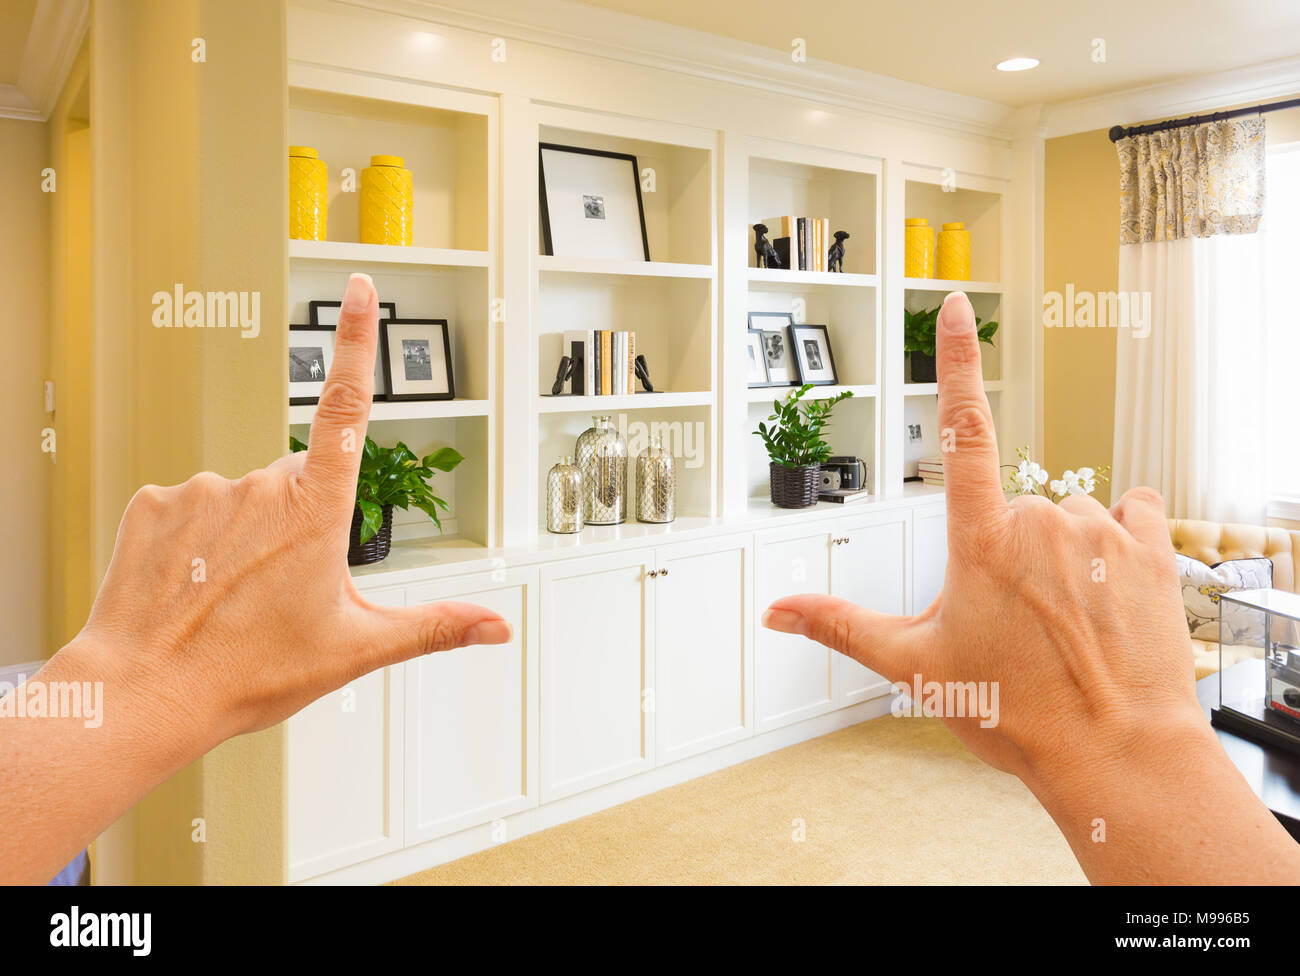 Hands Framing Custom Built In Shelves And Cabinets Wall Design